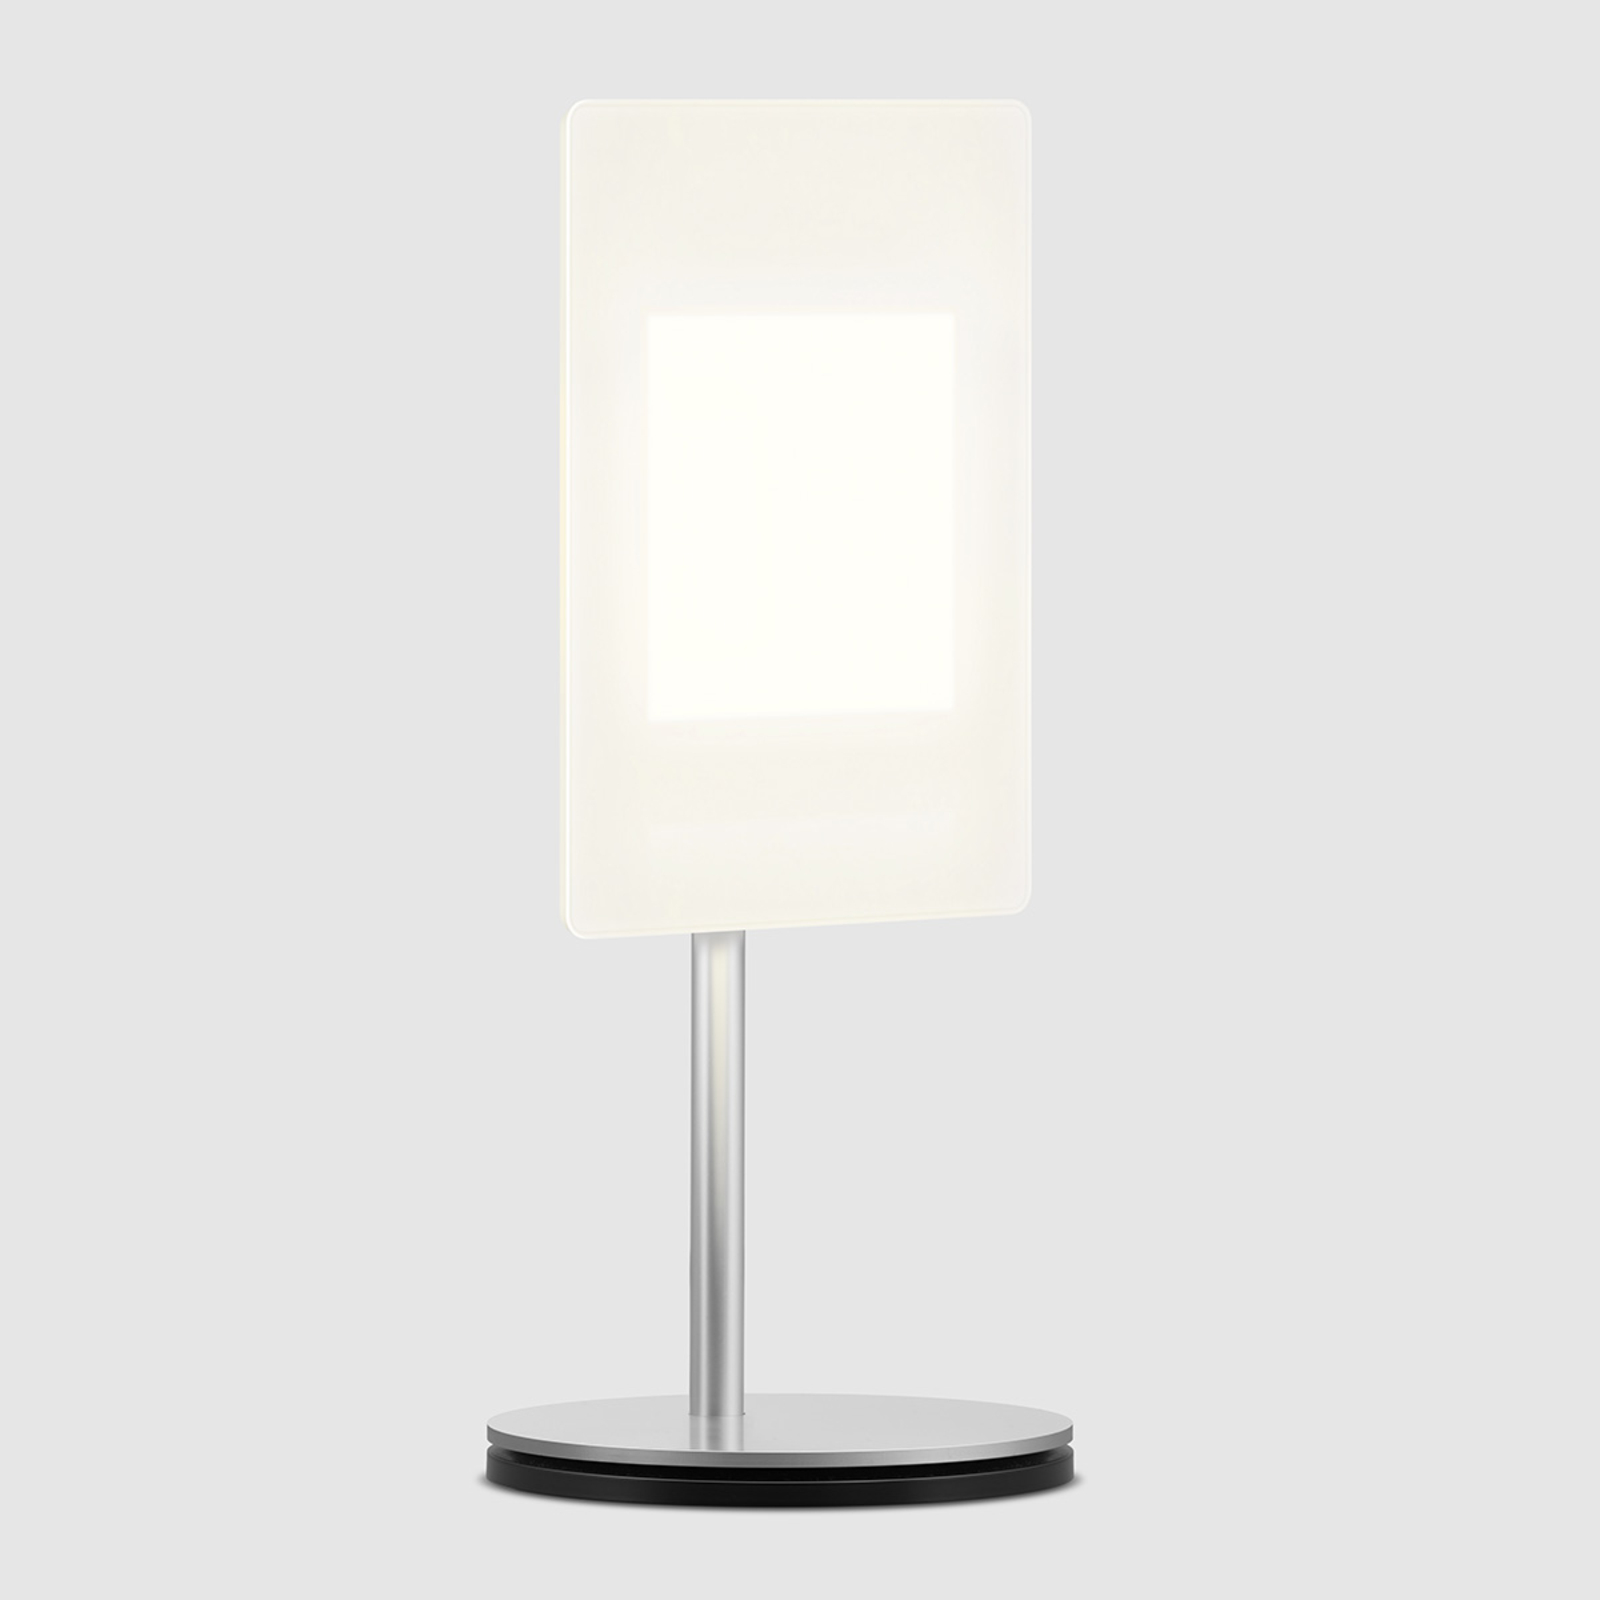 OLED table lamp OMLED One t1 with OLEDs, black